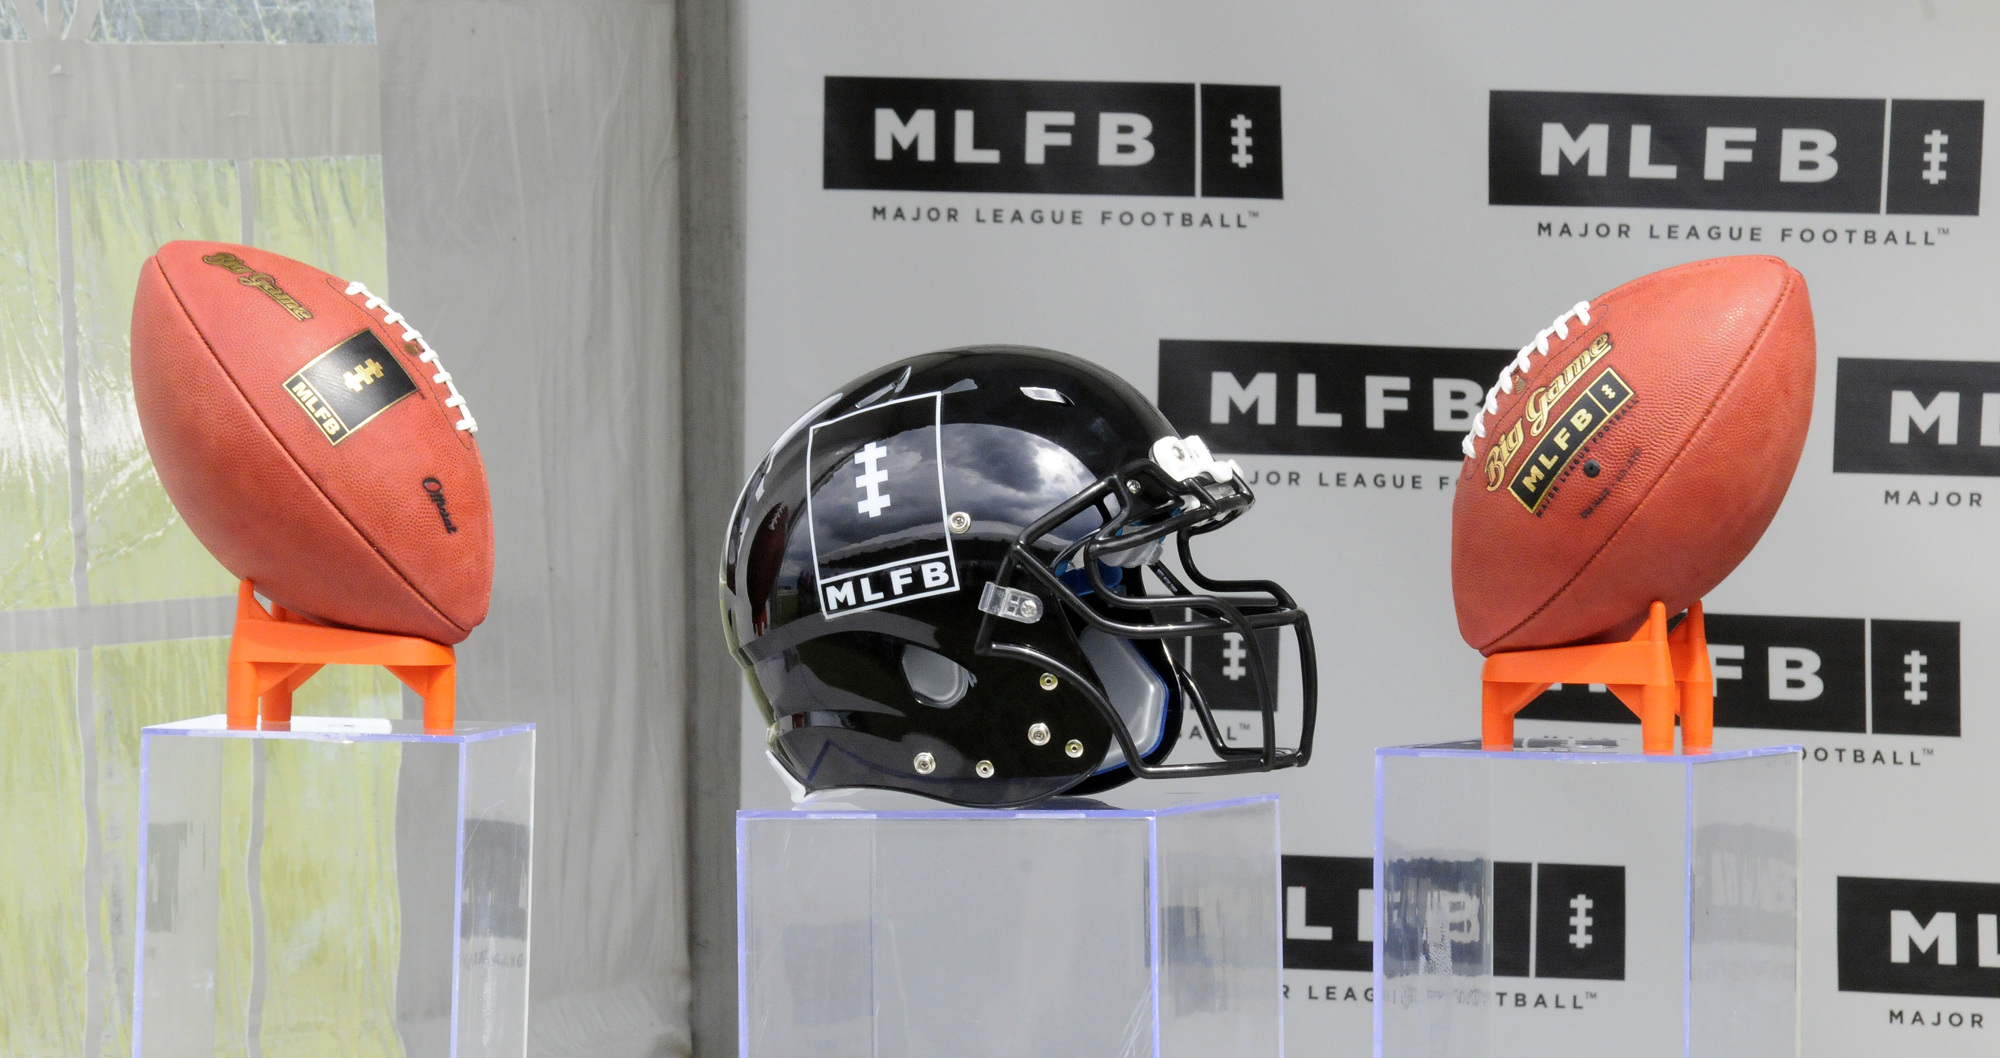 Major League Football will bring 10 teams with 80 players each to training camp. The league kicks off in the spring.